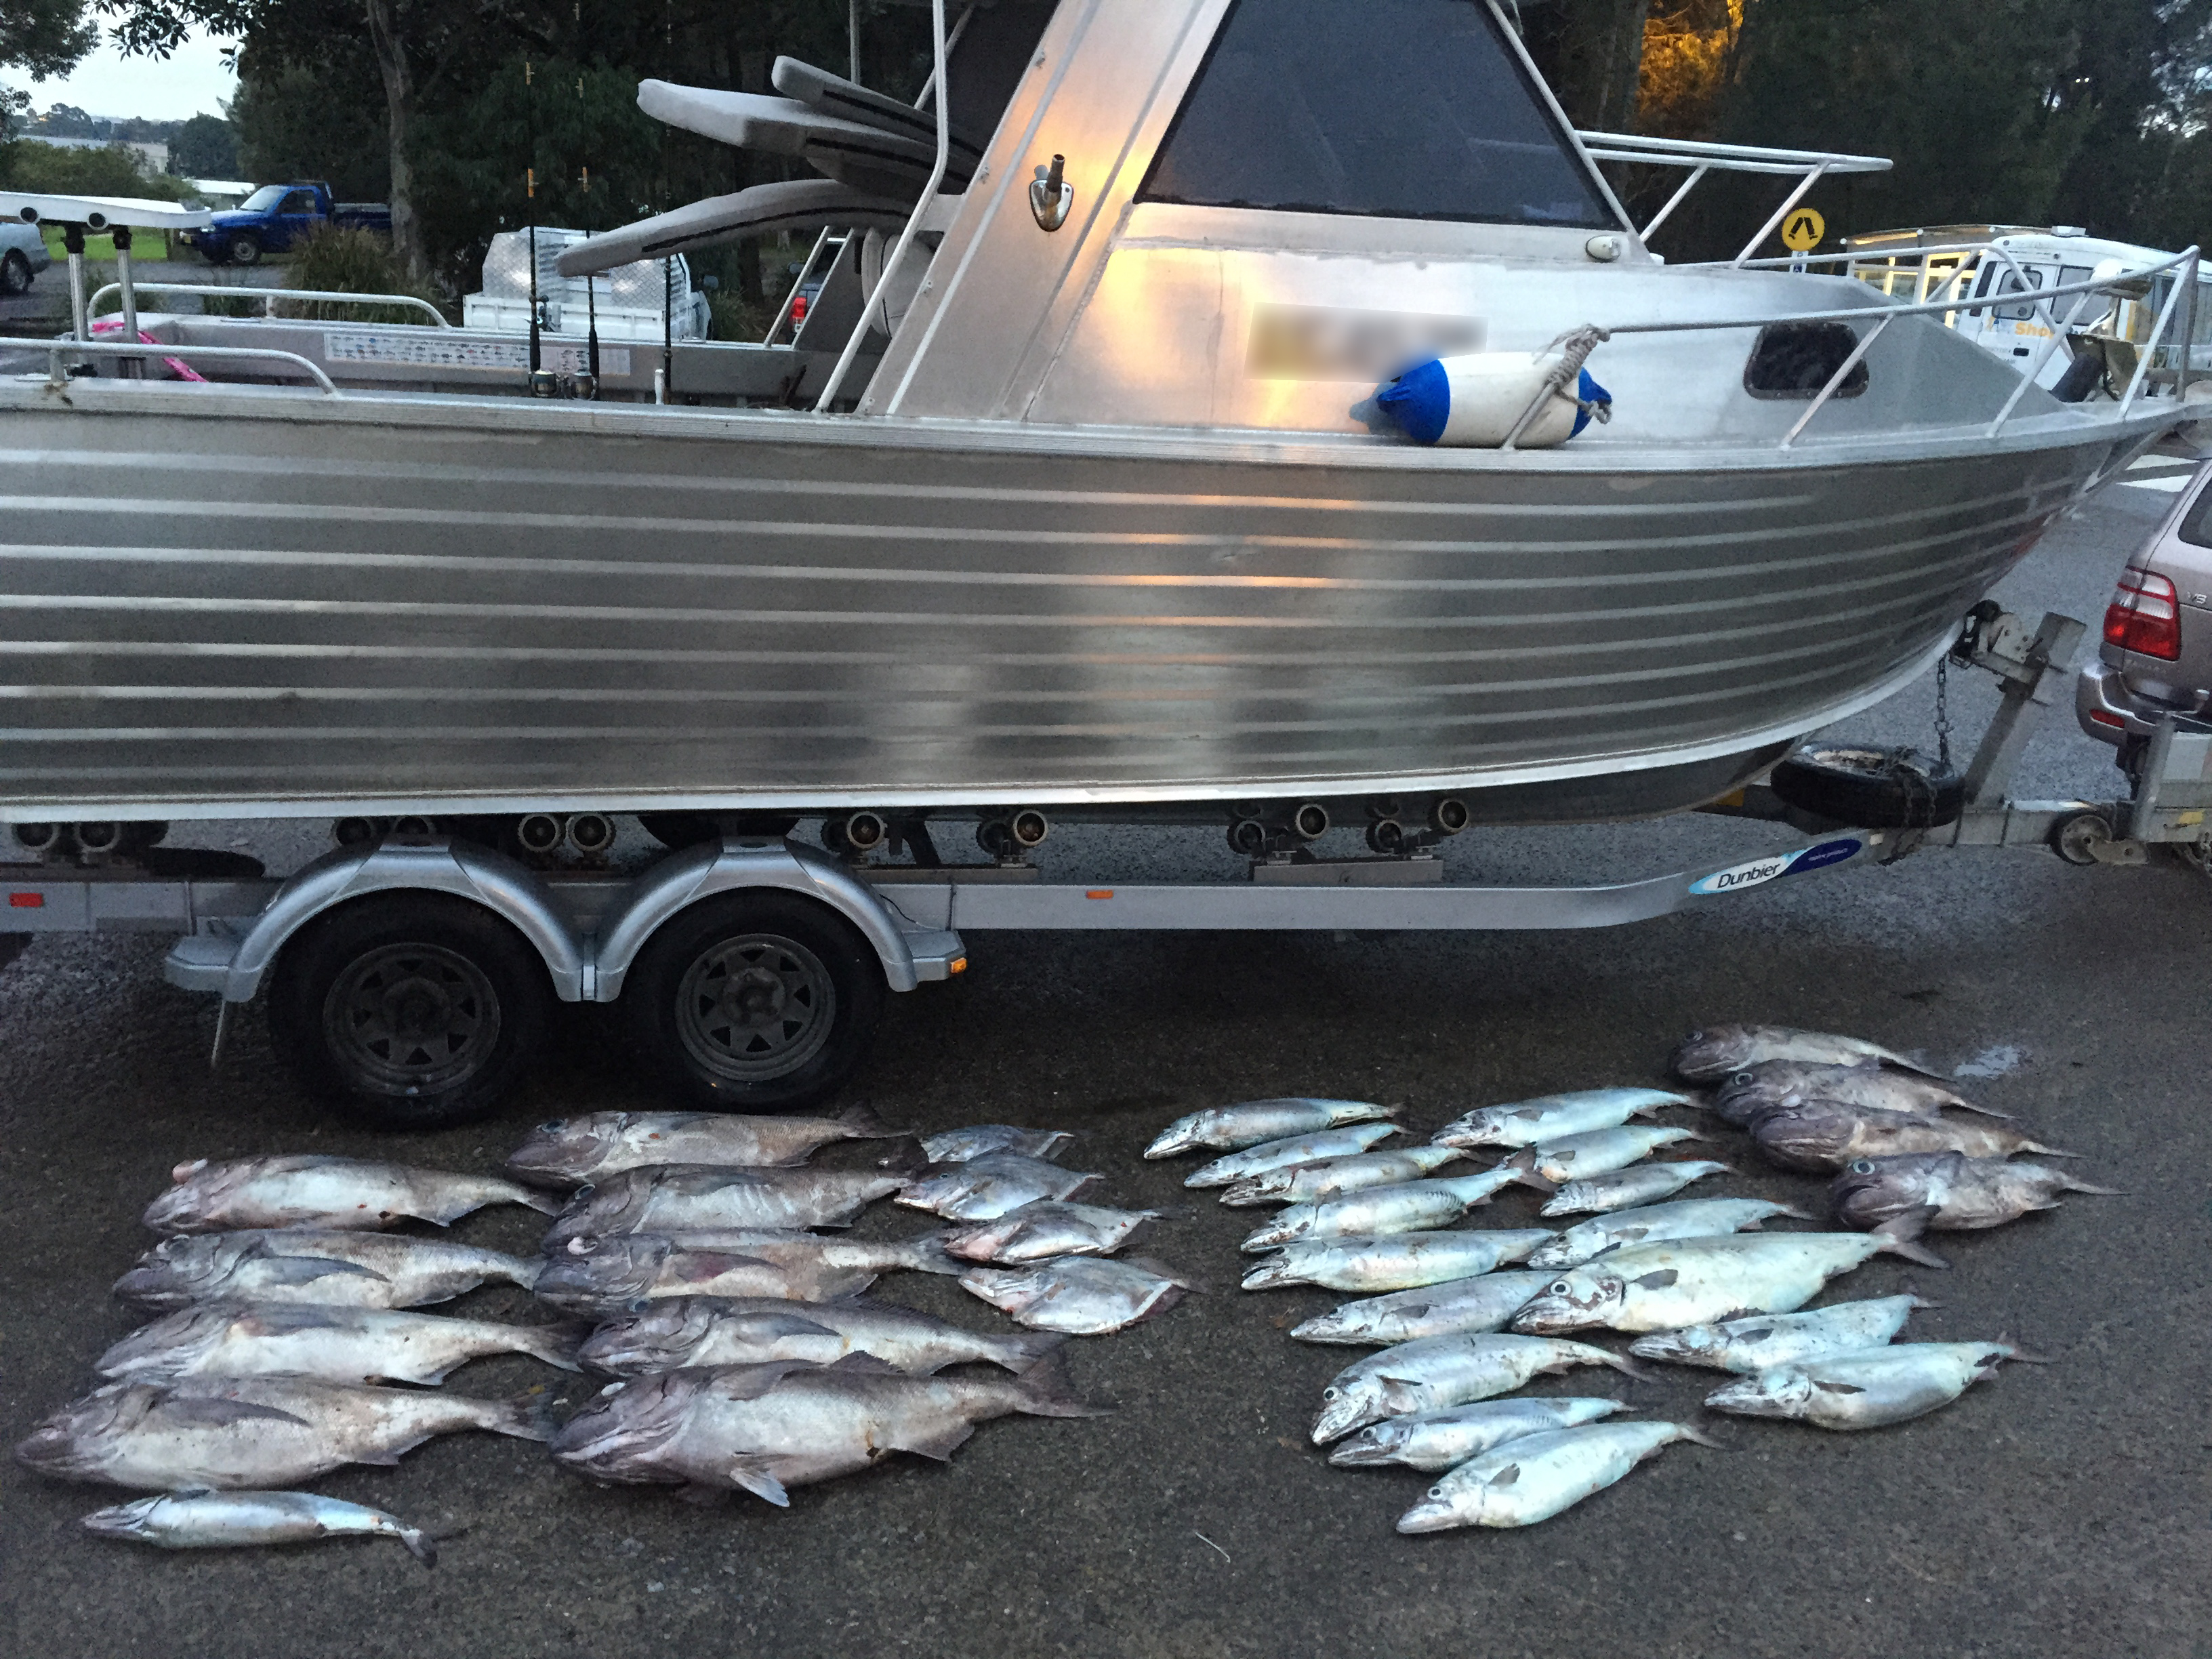 A boat forfeited by the Court and the illegally caught fish